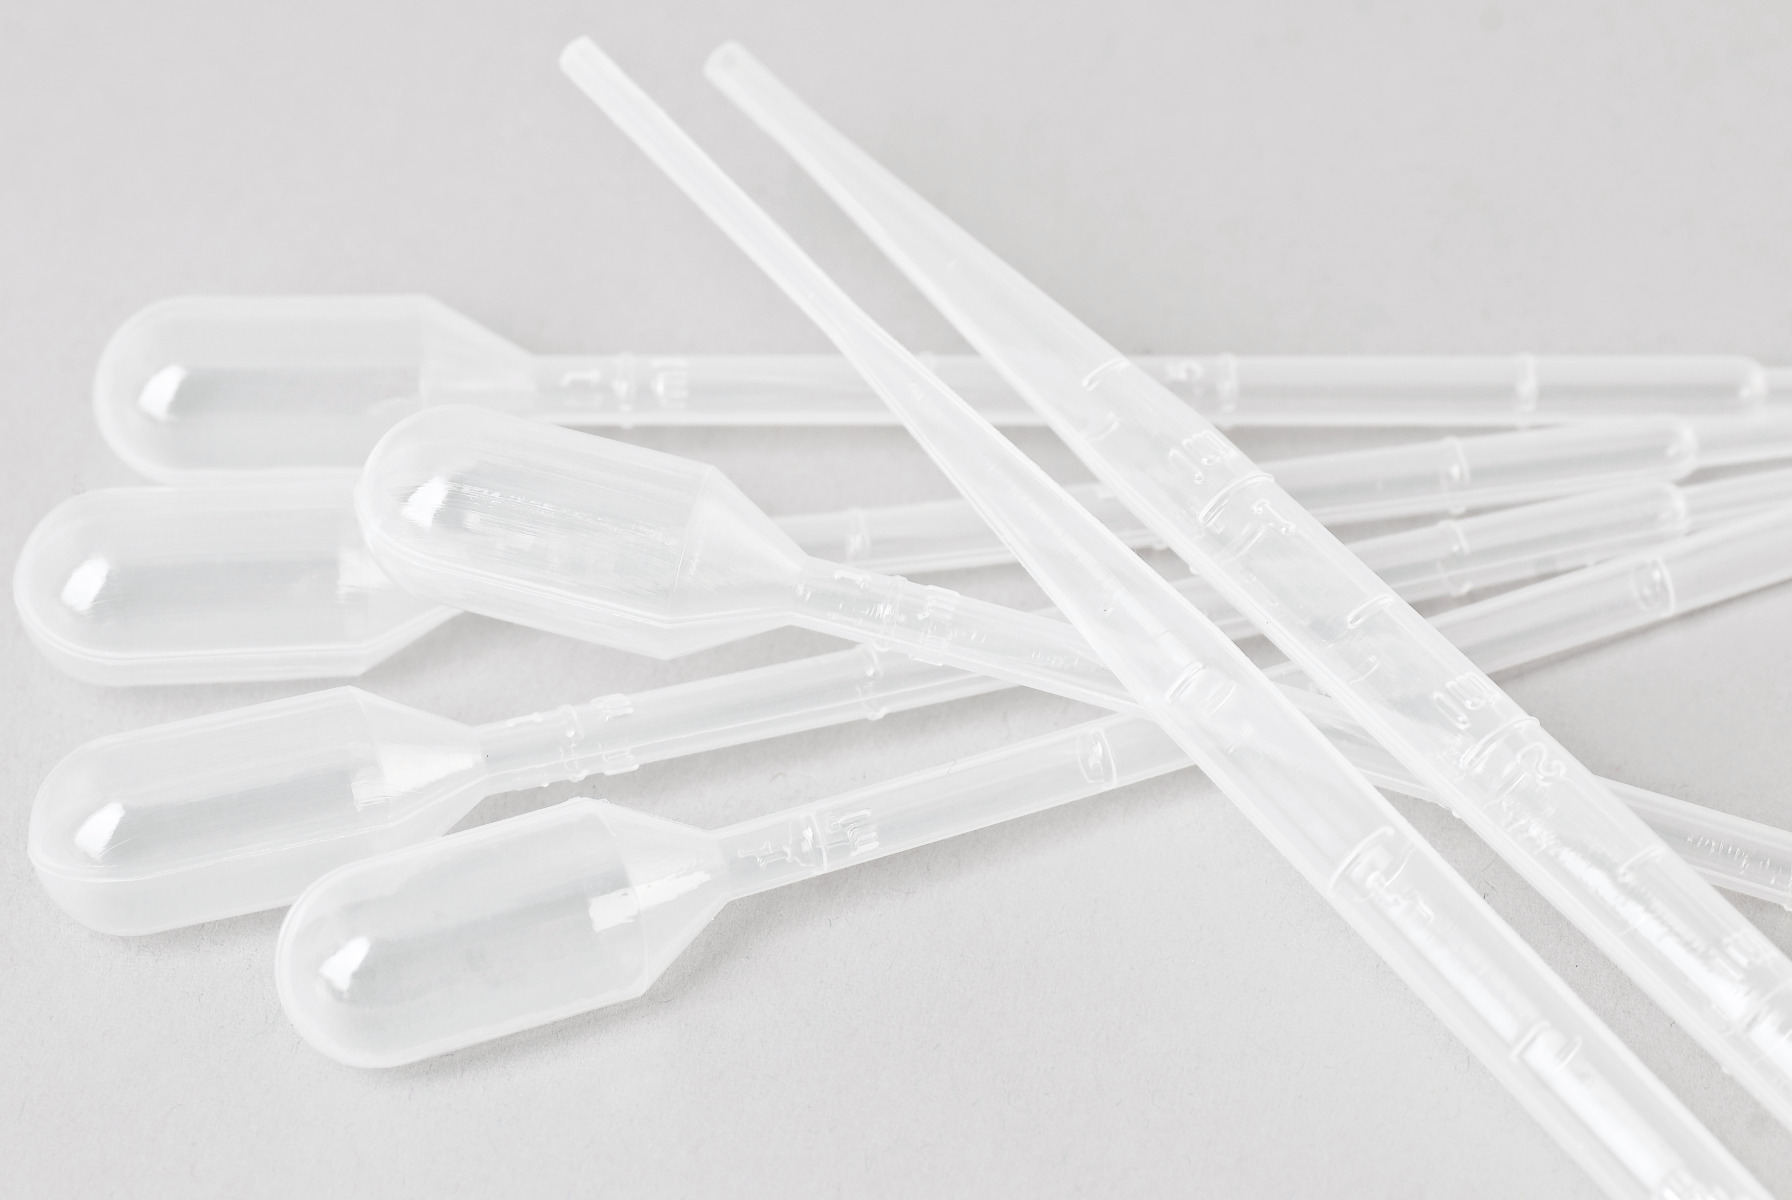 Pipettes & Syringes